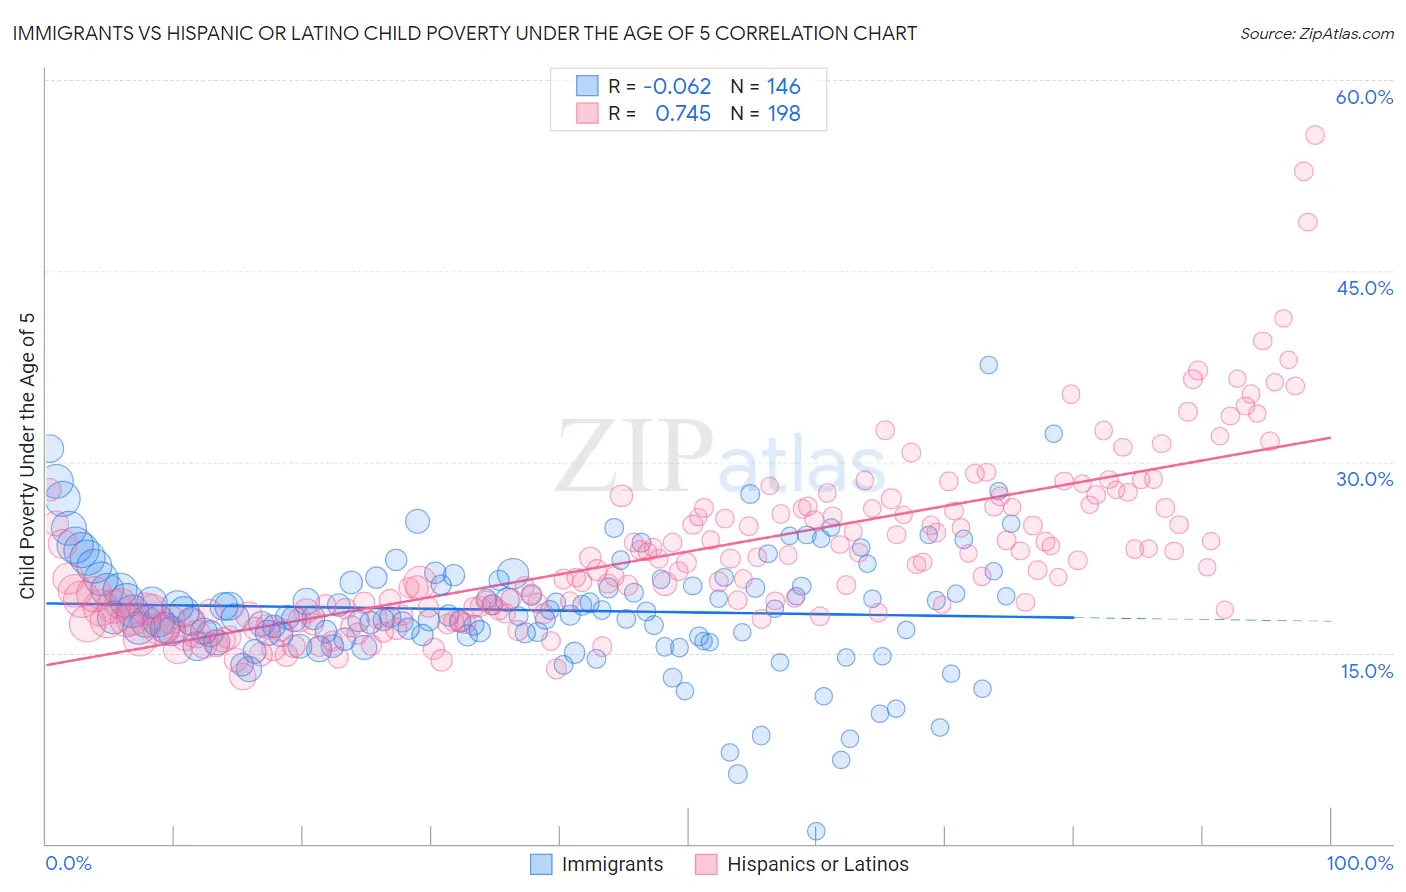 Immigrants vs Hispanic or Latino Child Poverty Under the Age of 5